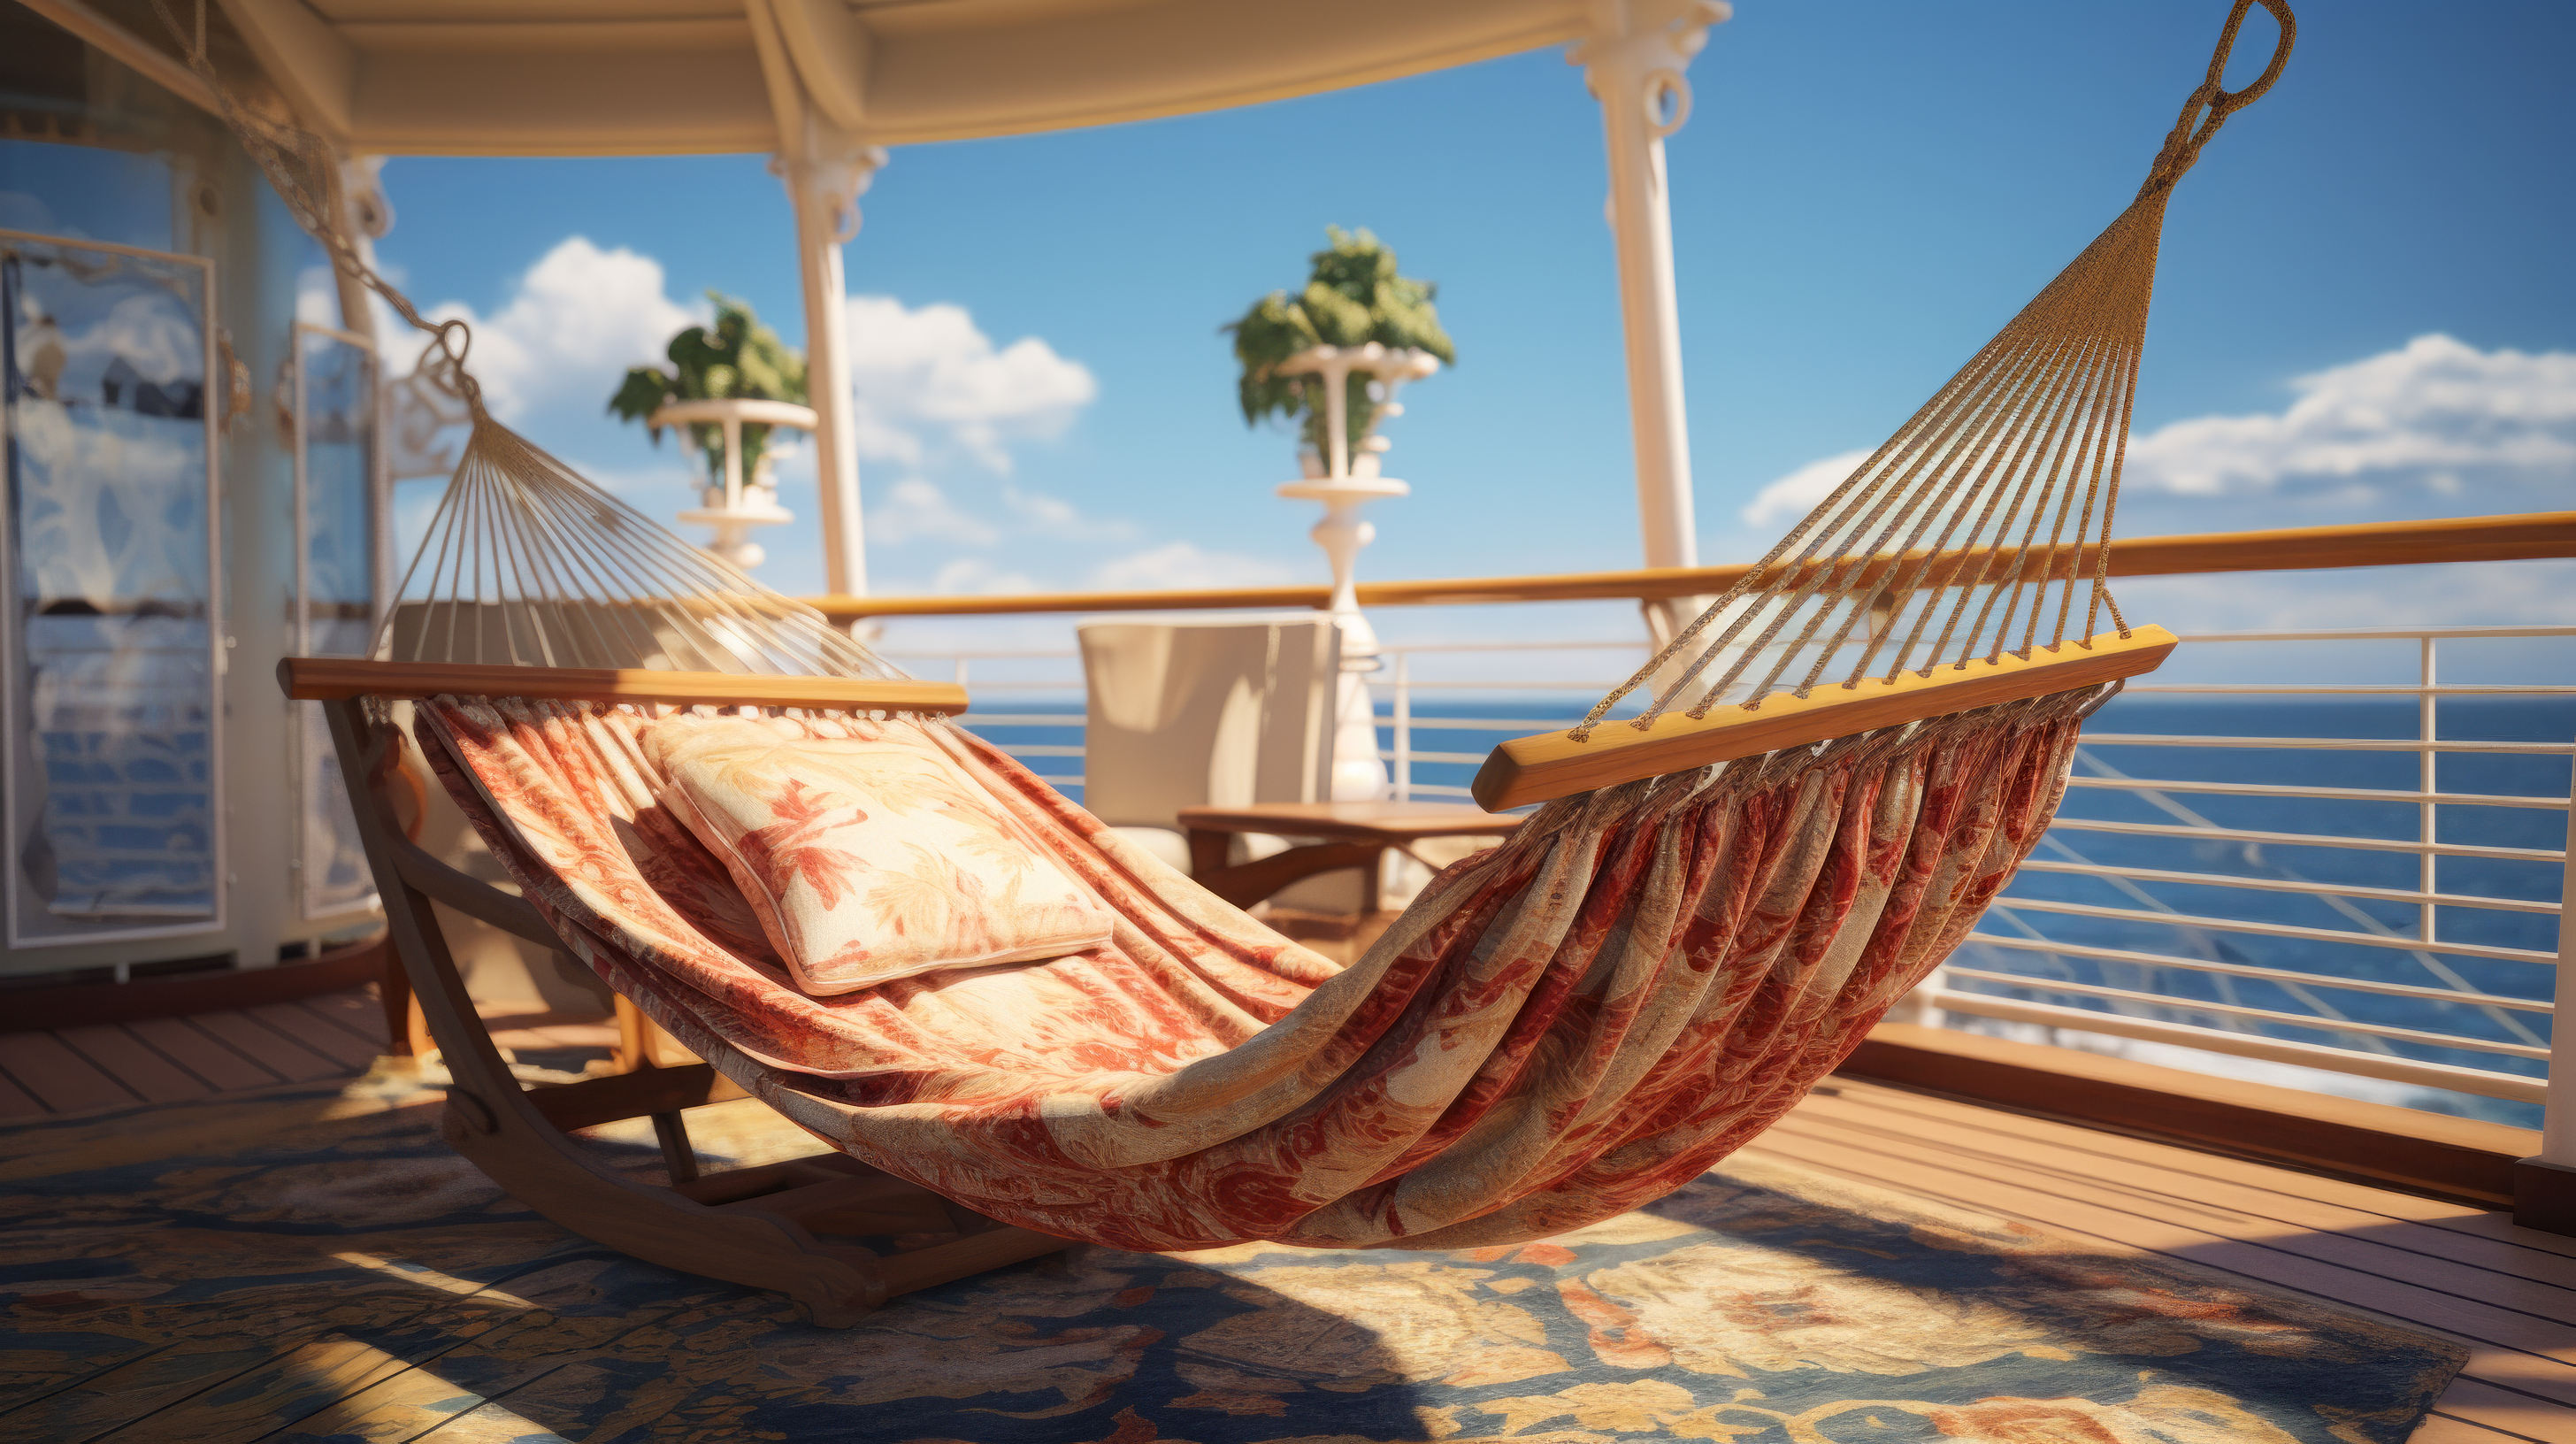 Luxurious ocean view from a cruise deck with a cozy hammock, perfect as an HD AI art desktop wallpaper and background.